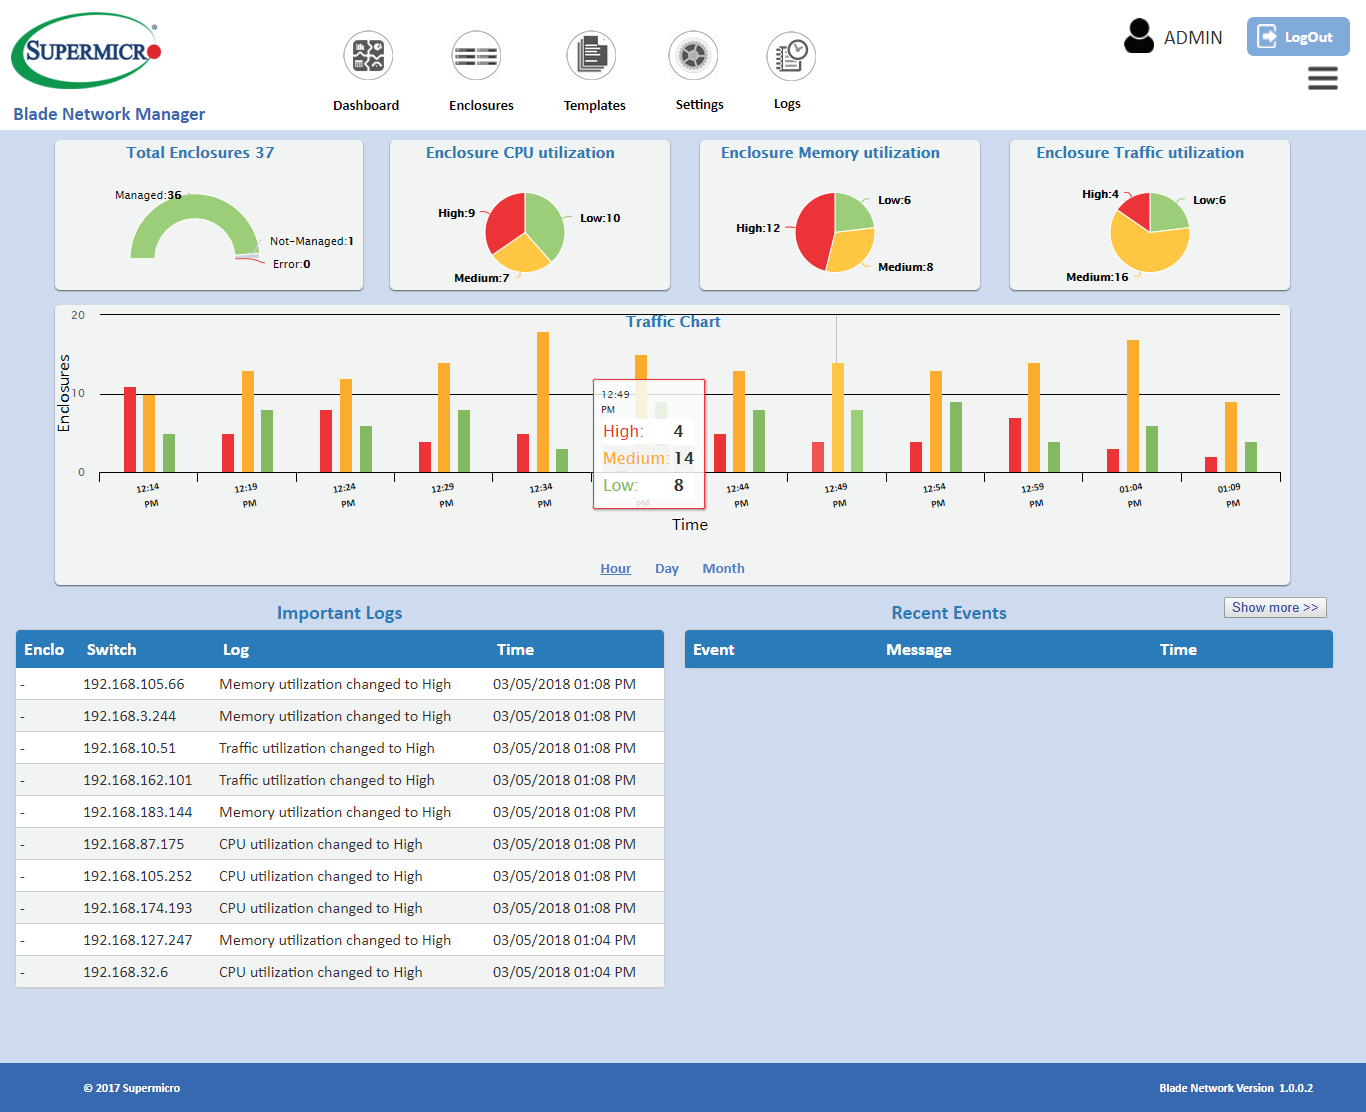 Supermicro BNM Dashboard in the simplest fashion